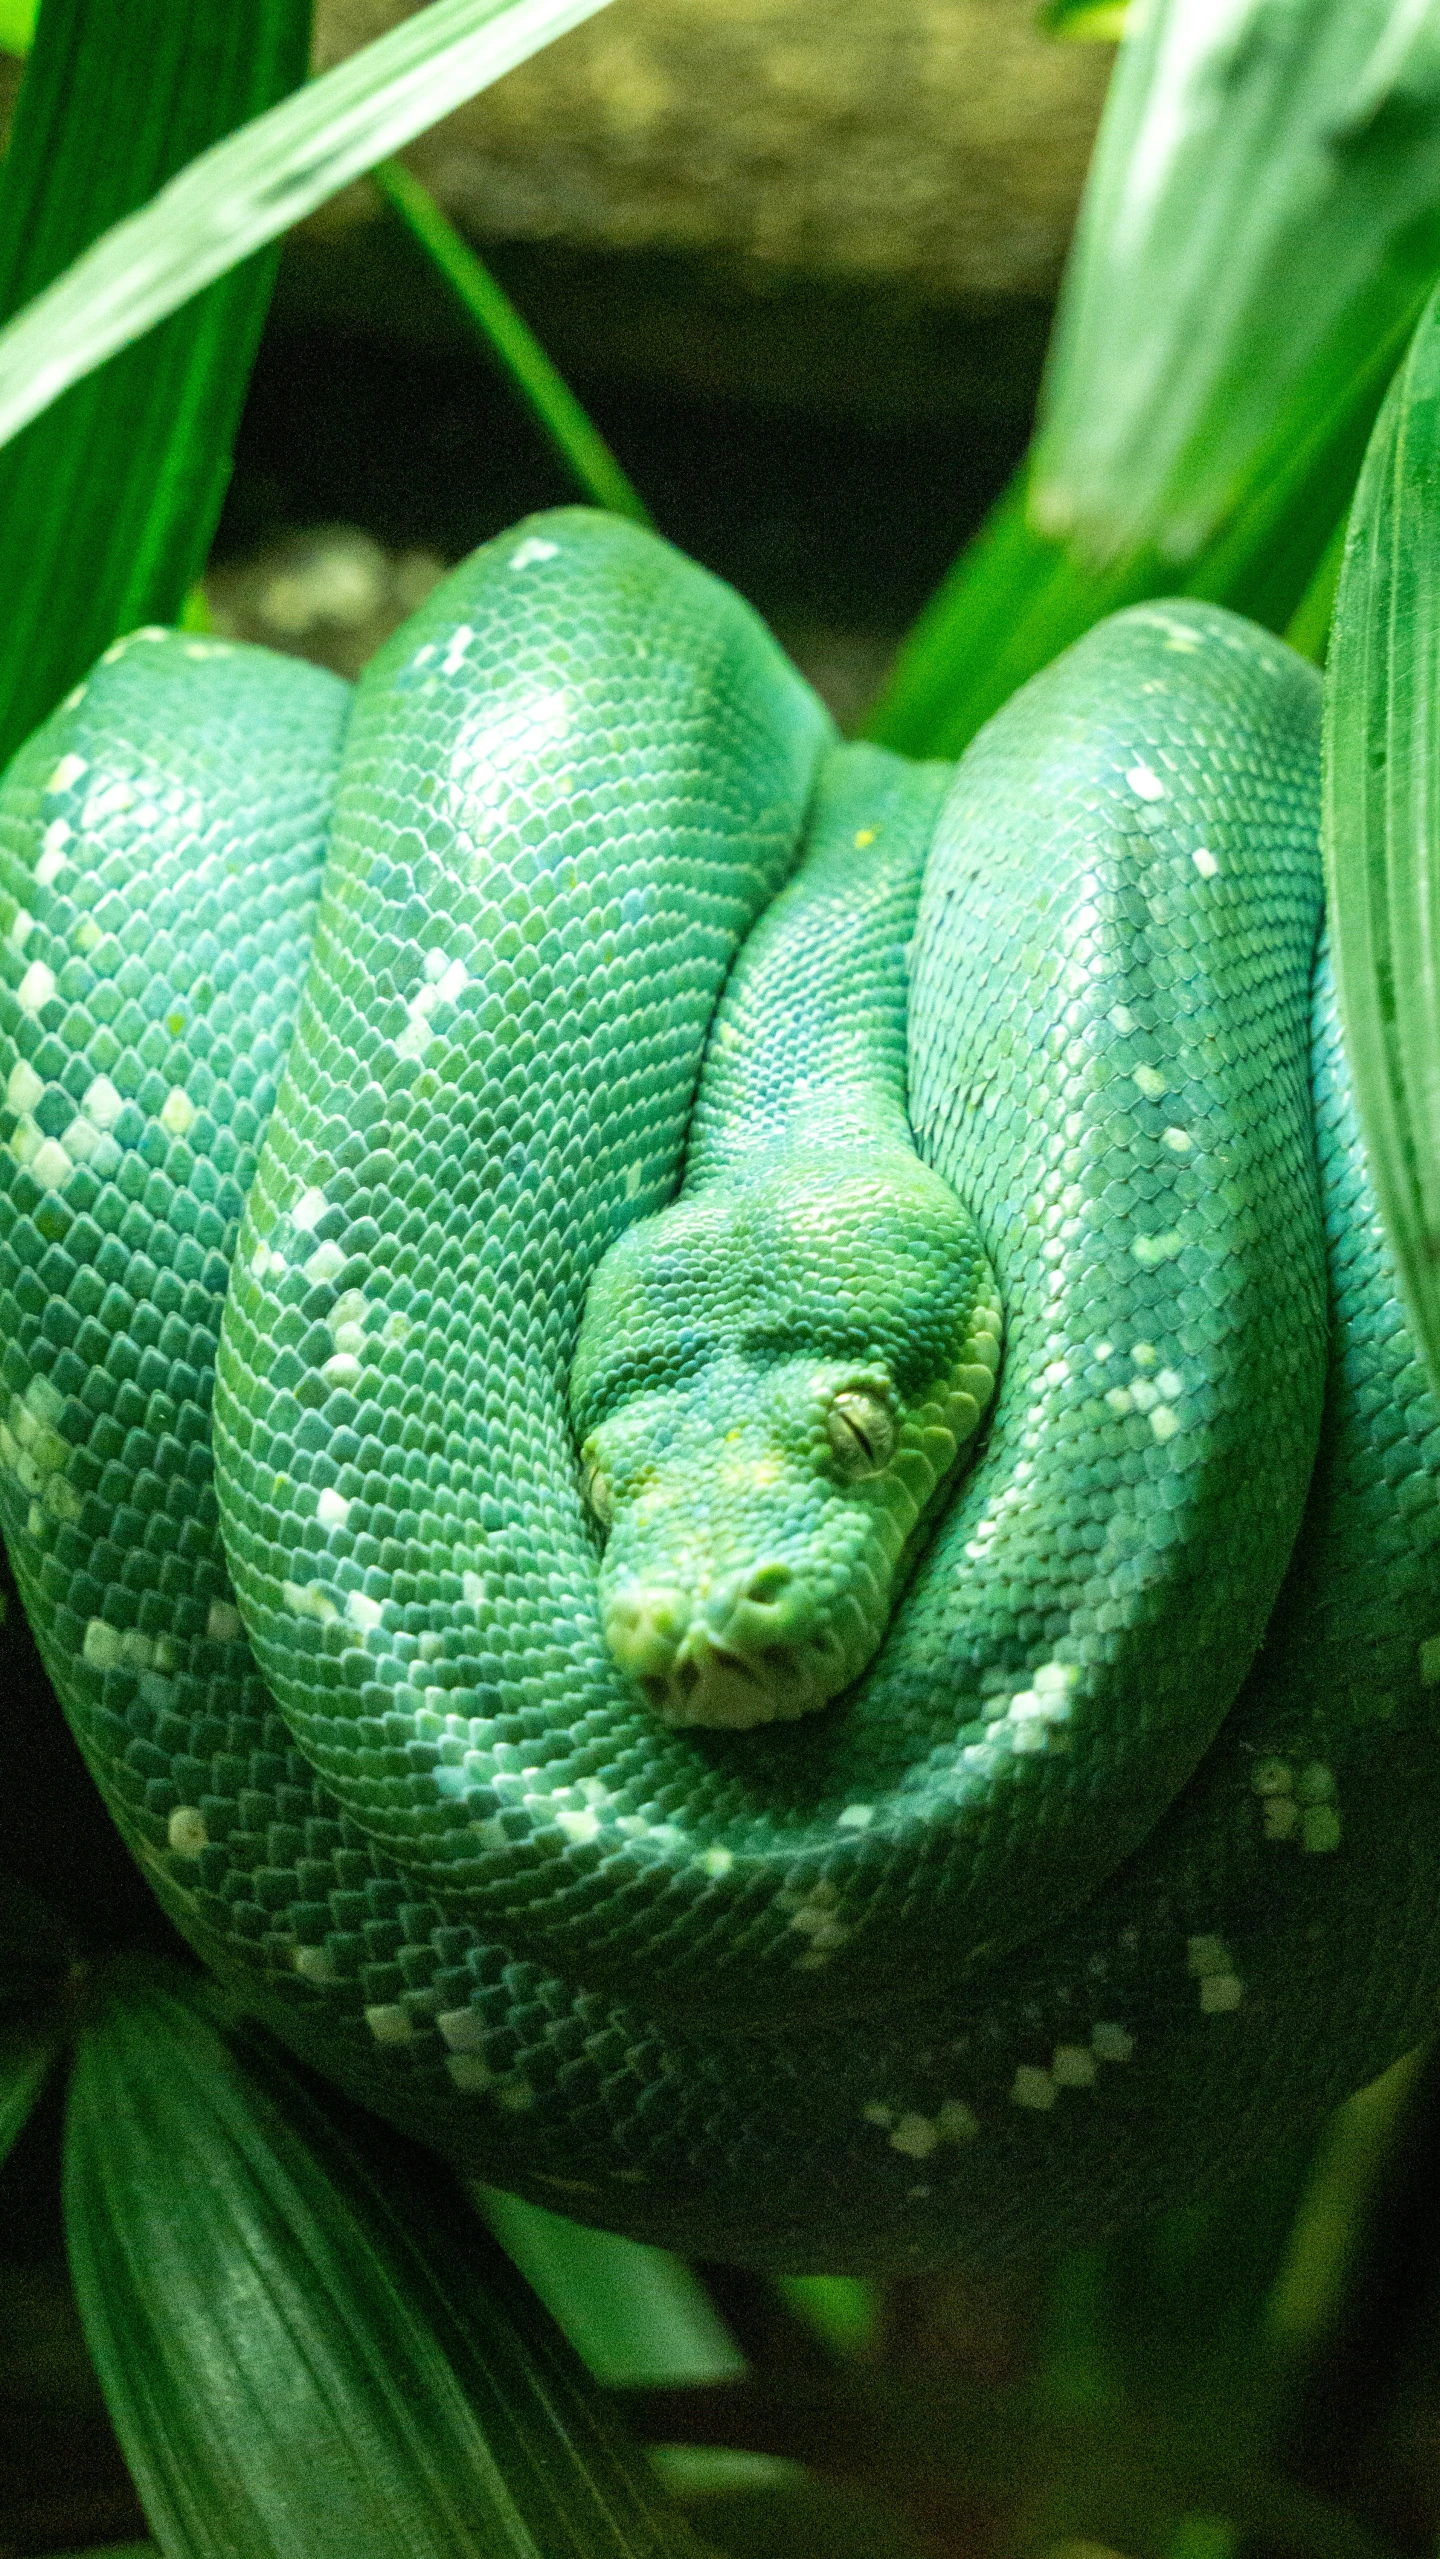 green snake curled up to the side in the jungle